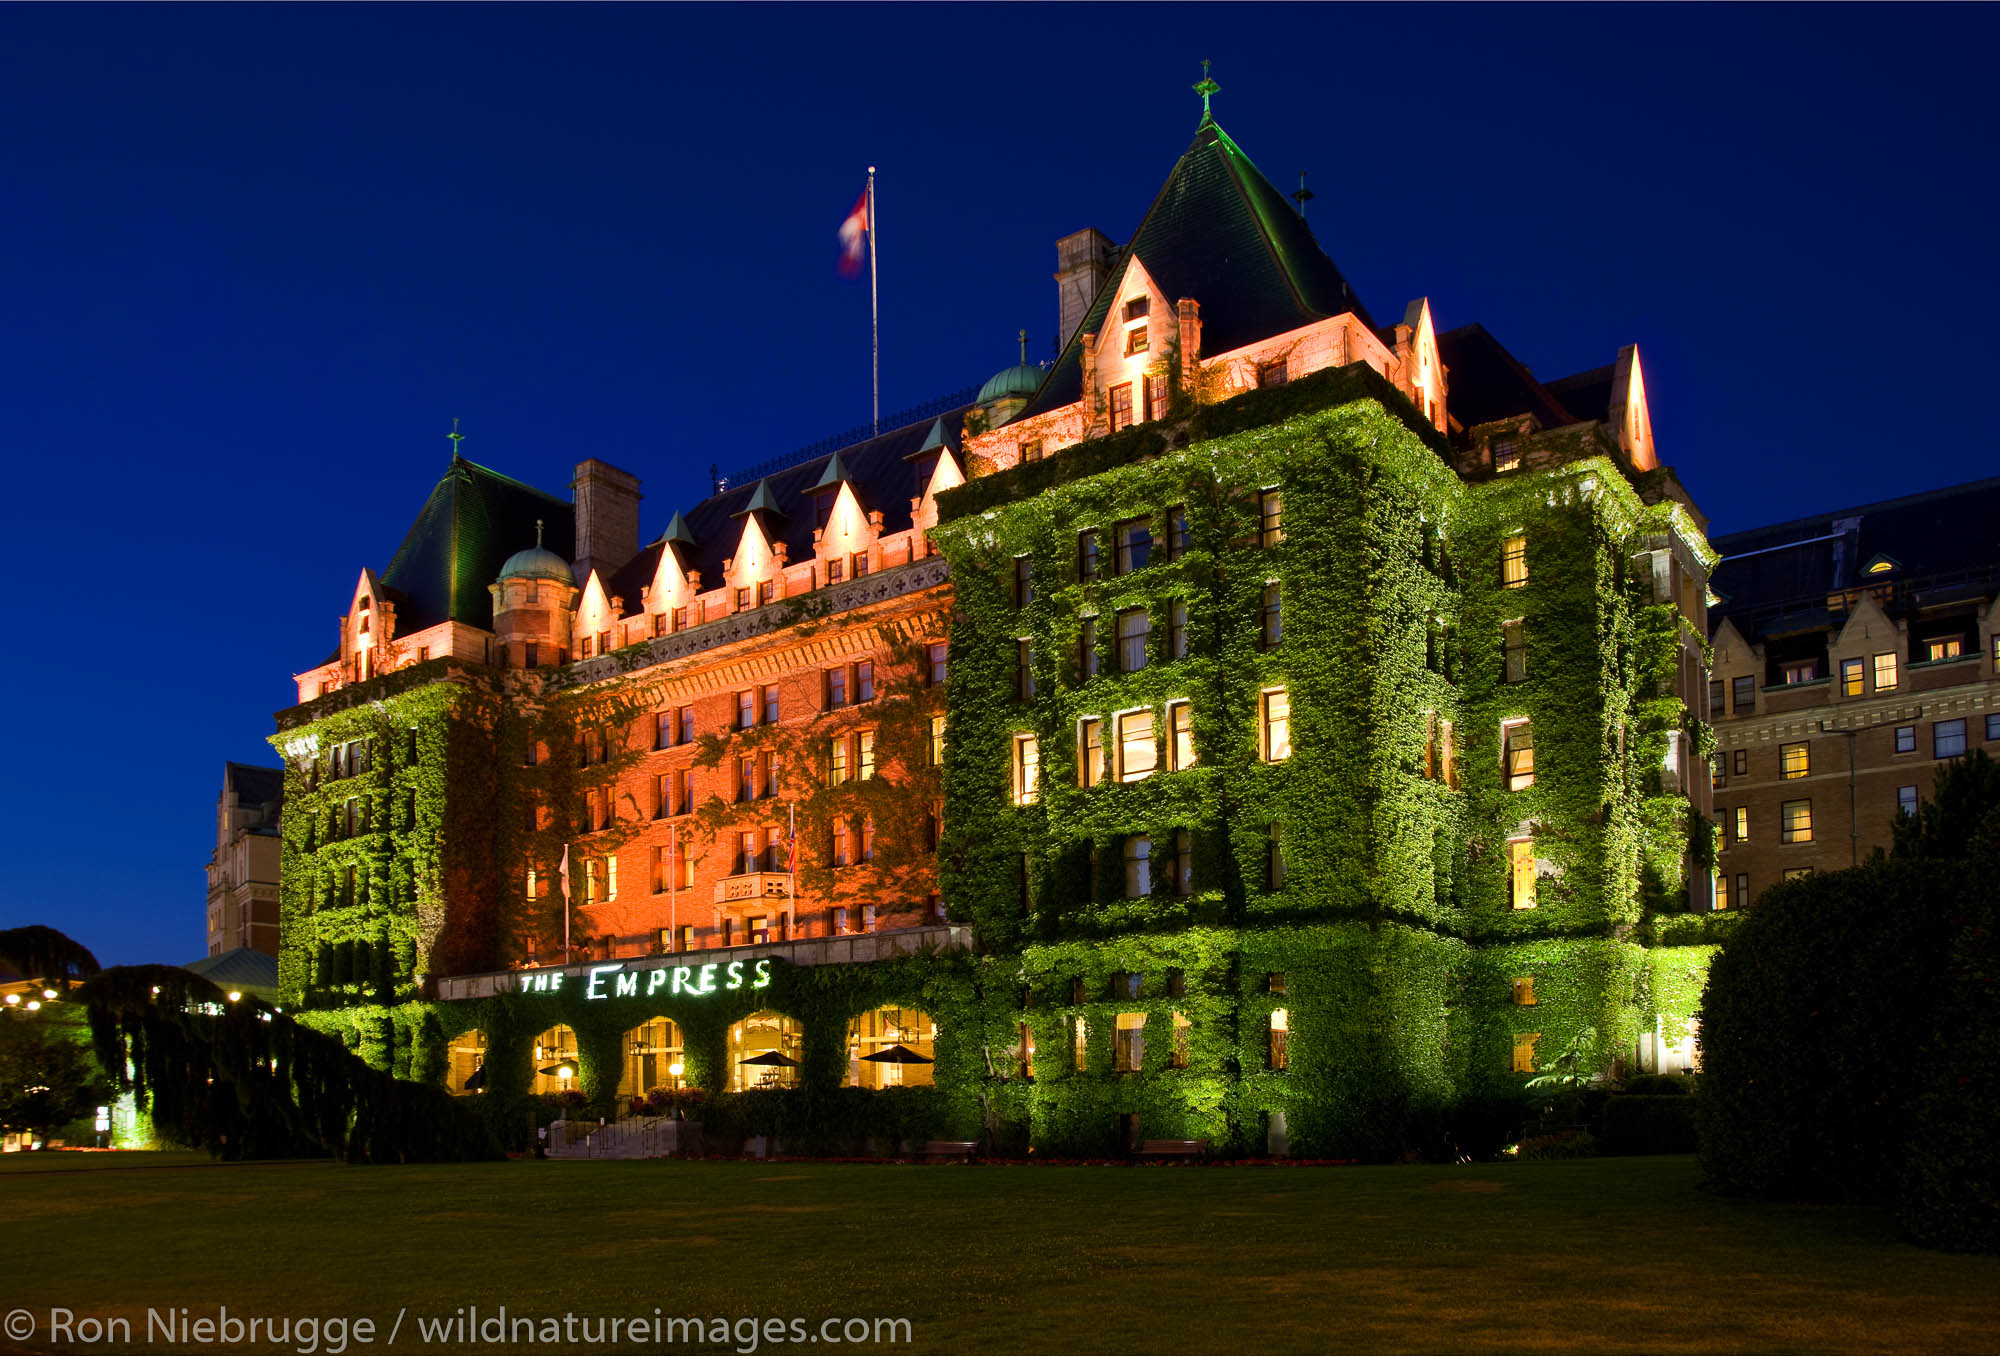 The historic Empress Hotel located on the Inner Harbour, Victoria, Vancouver Island, British Columbia, Canada.